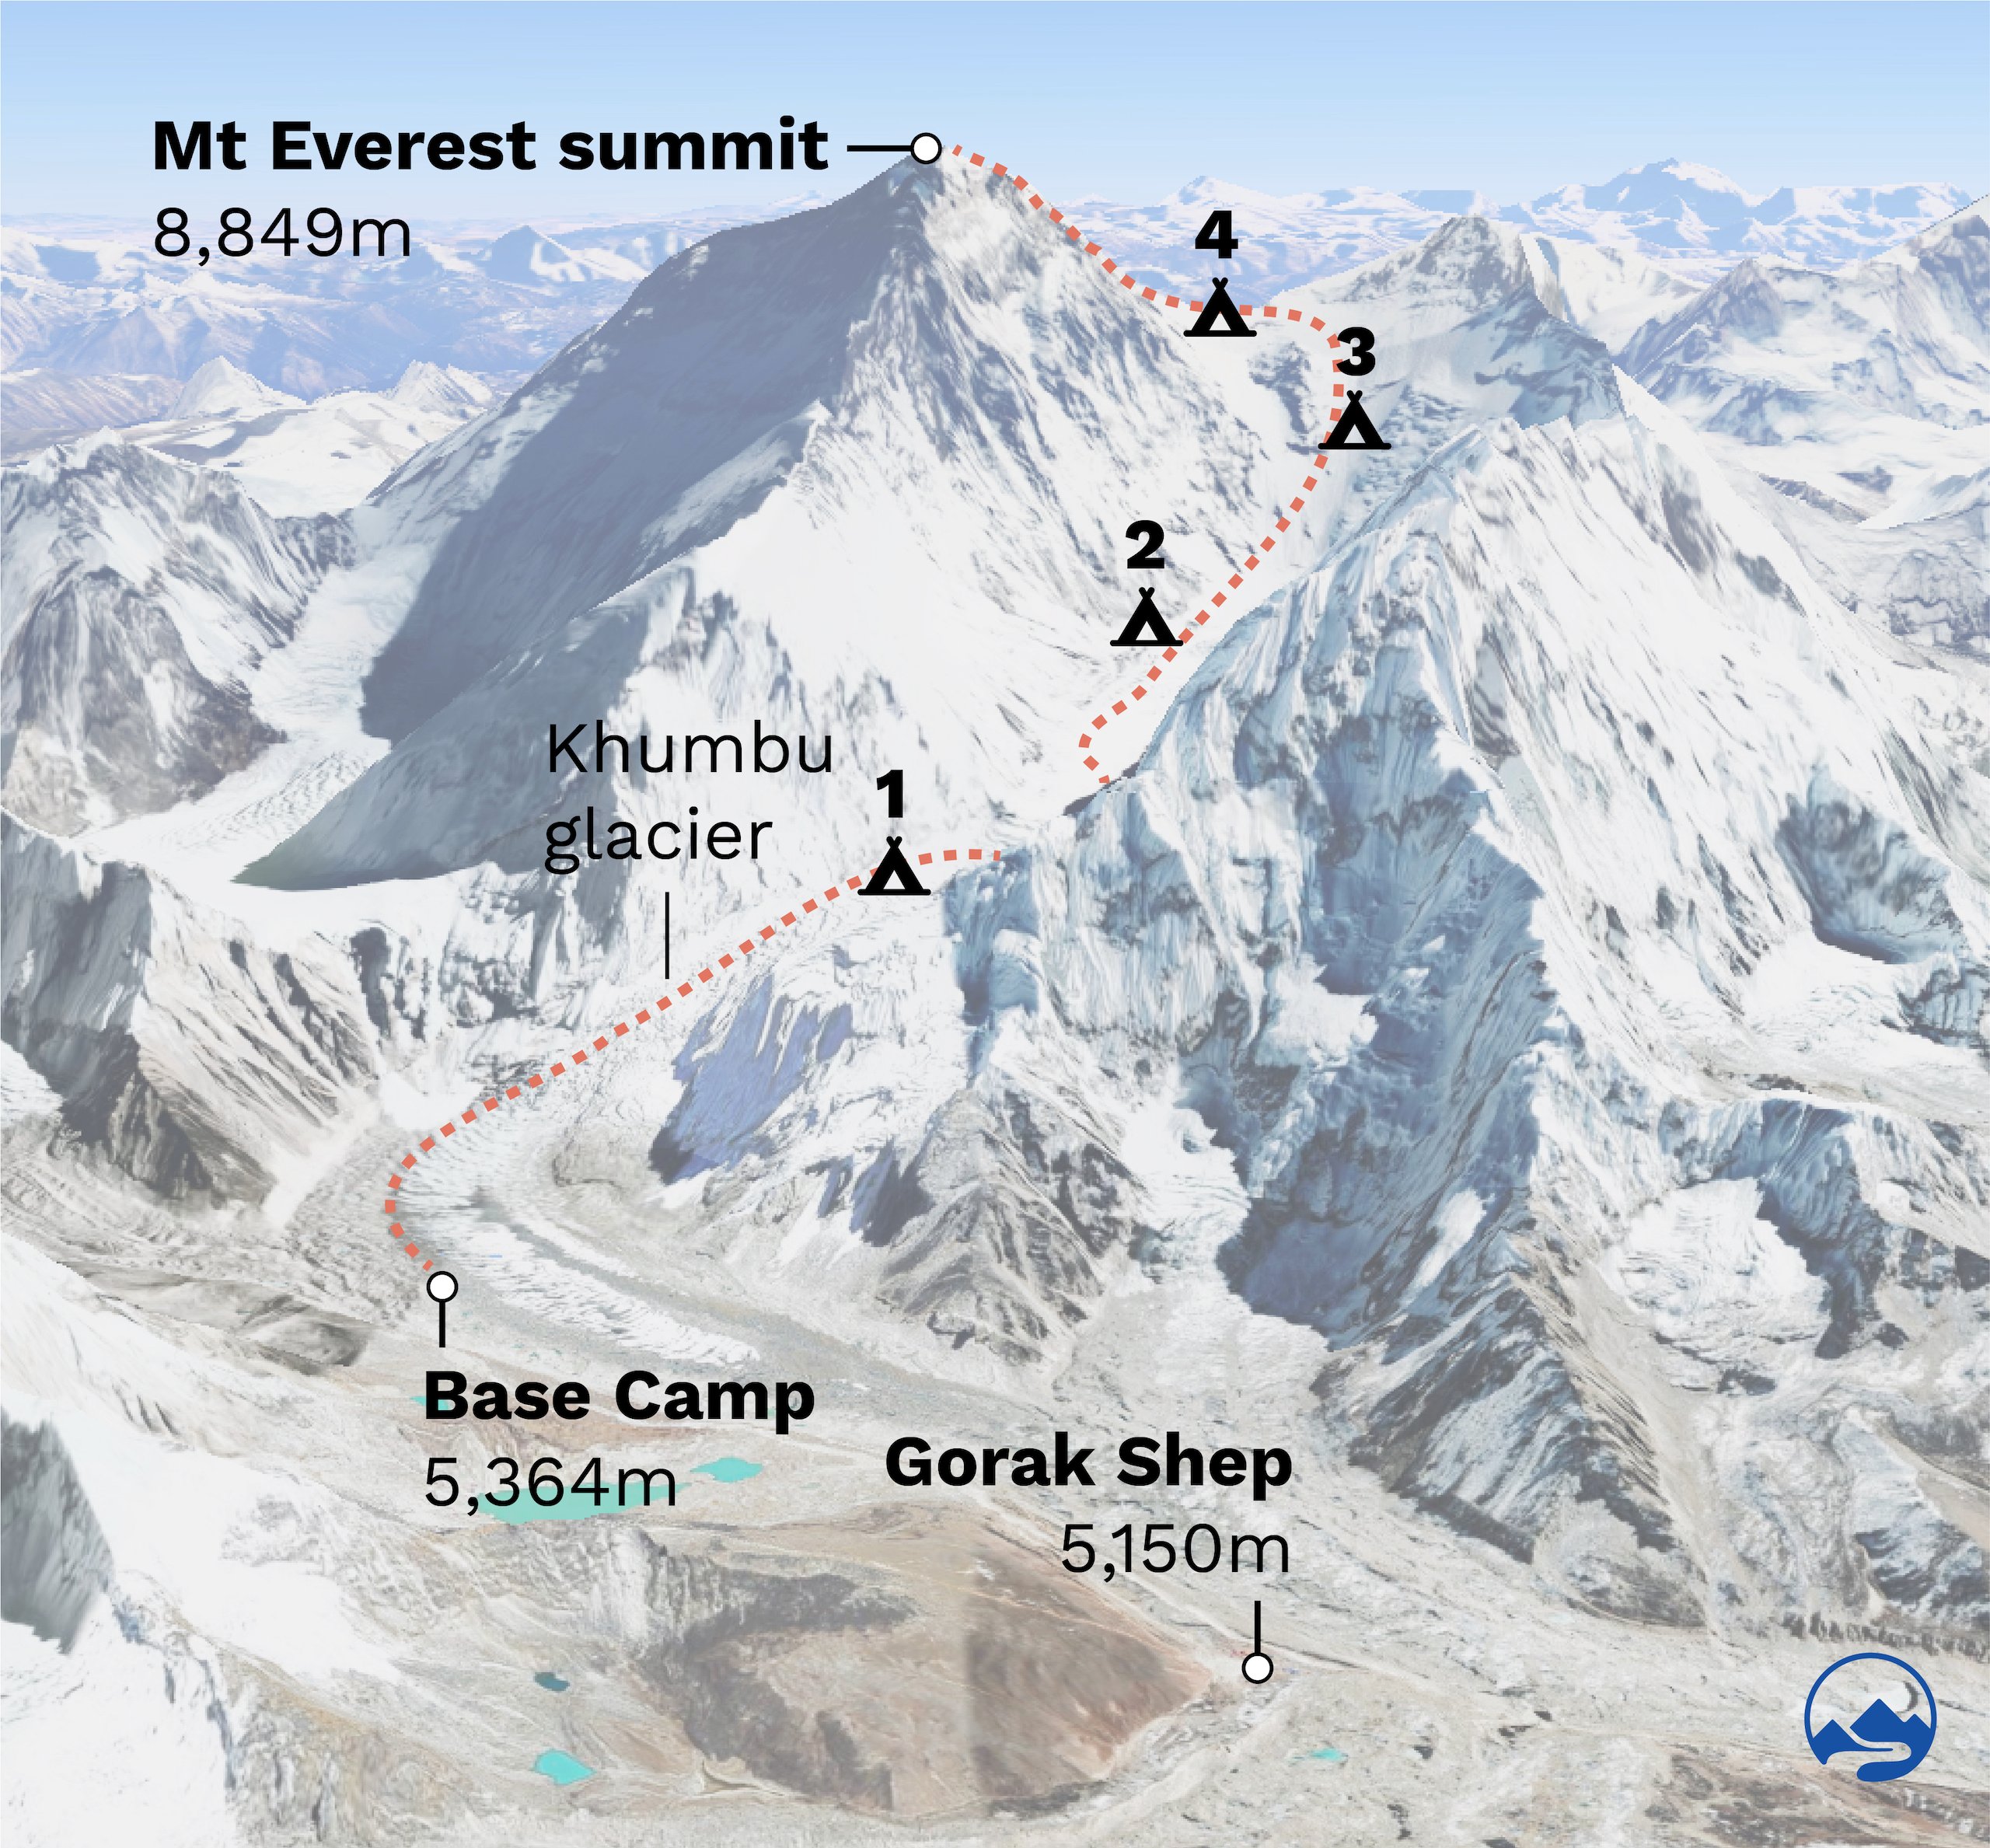 Mount Everest south col route map base camp, camp 1 camp 2 camp 3 camp 4